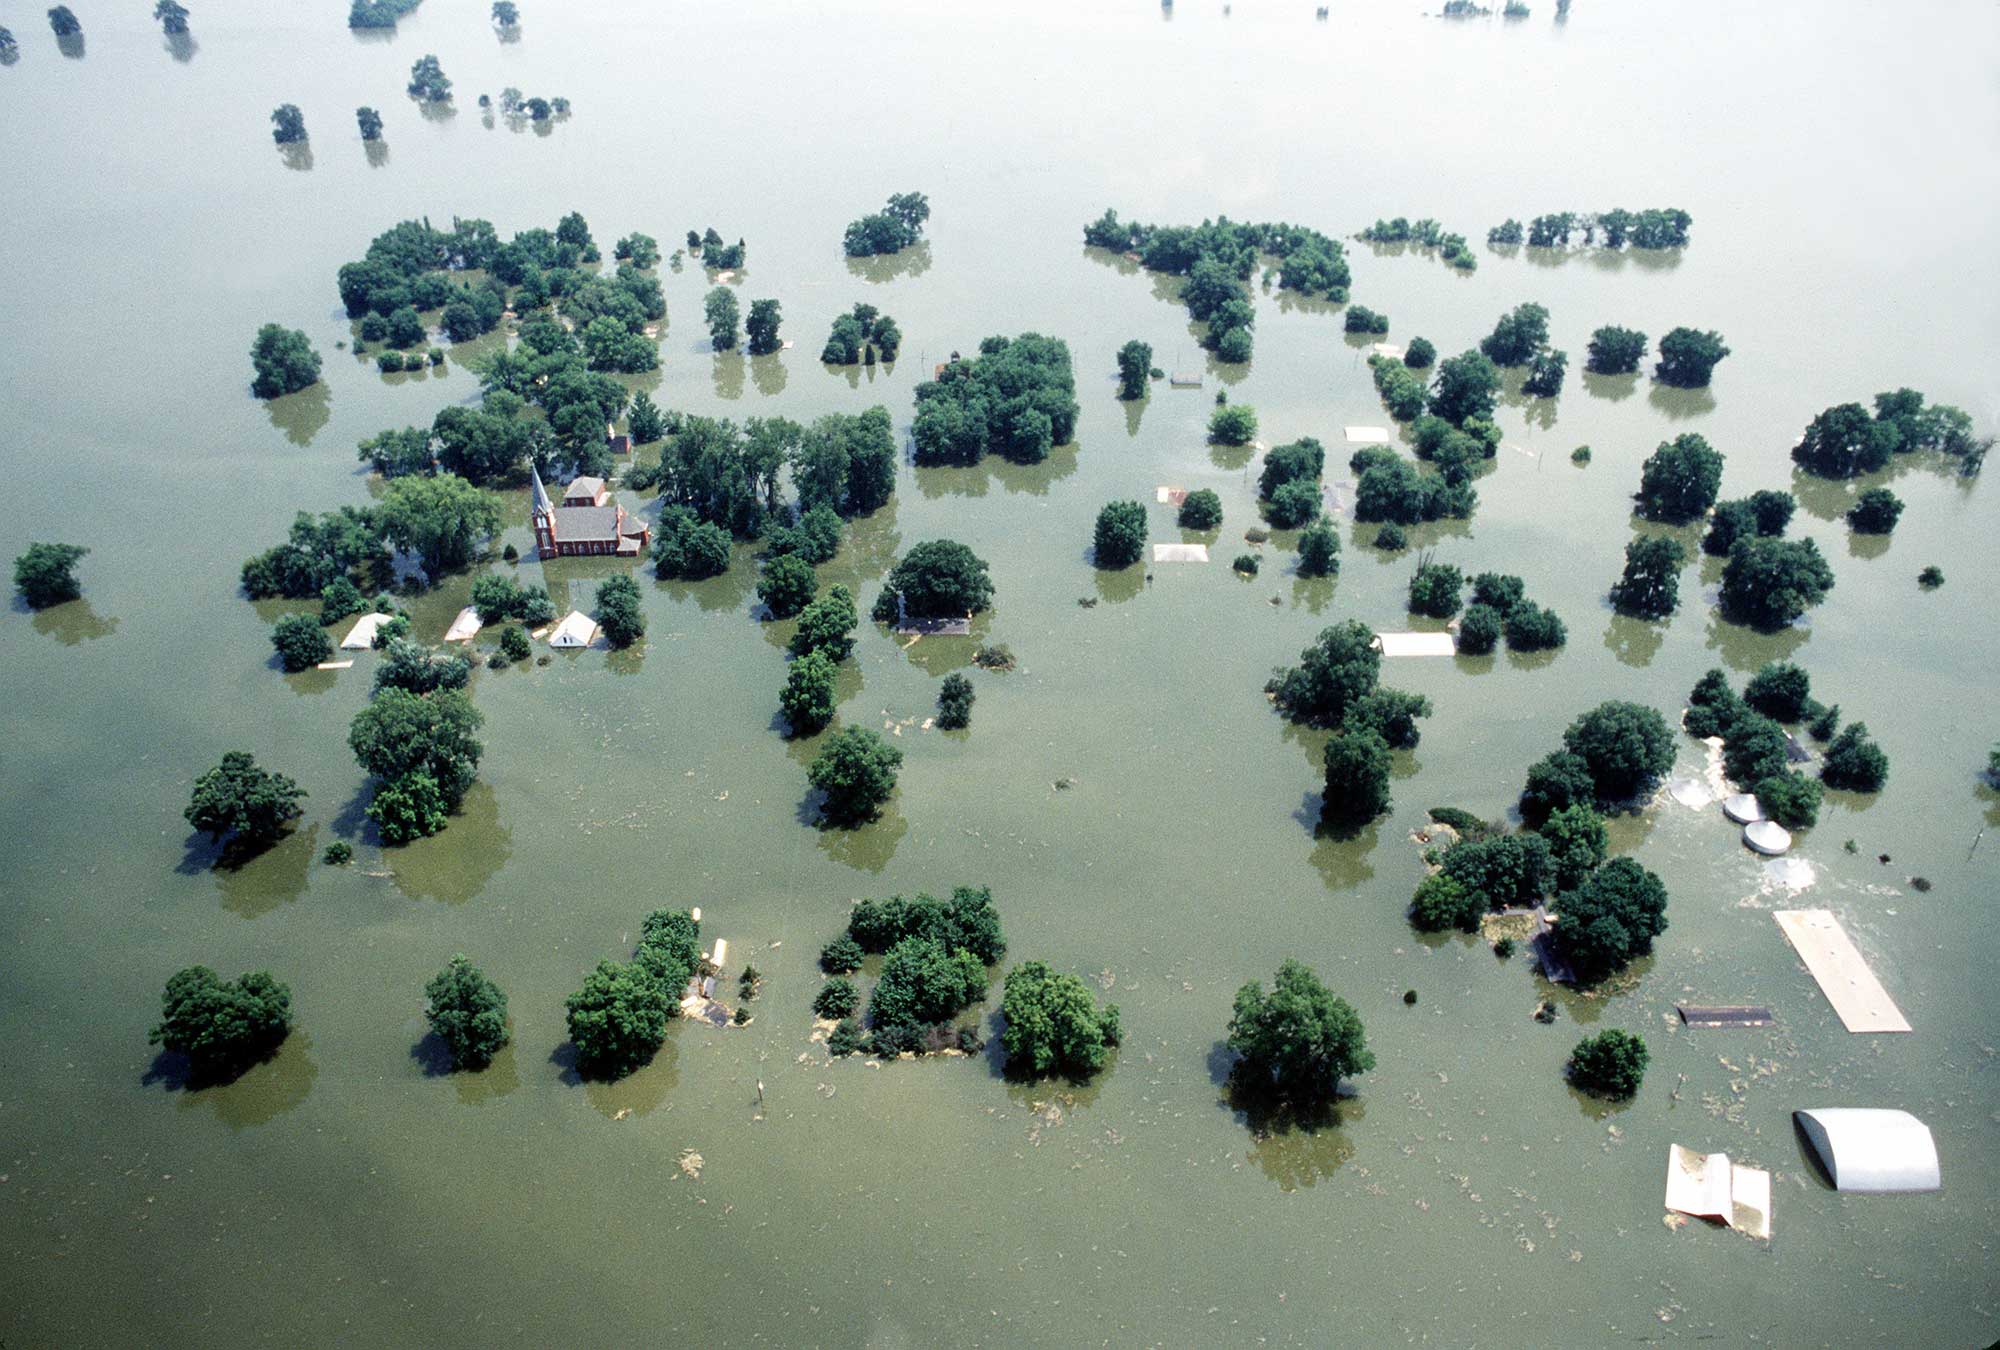 Photograph of flooding in Kaskaskia, Illinois, in 1993. The photo shows a town that is completely flooded, with rooftops and treetops sticking out above the water.